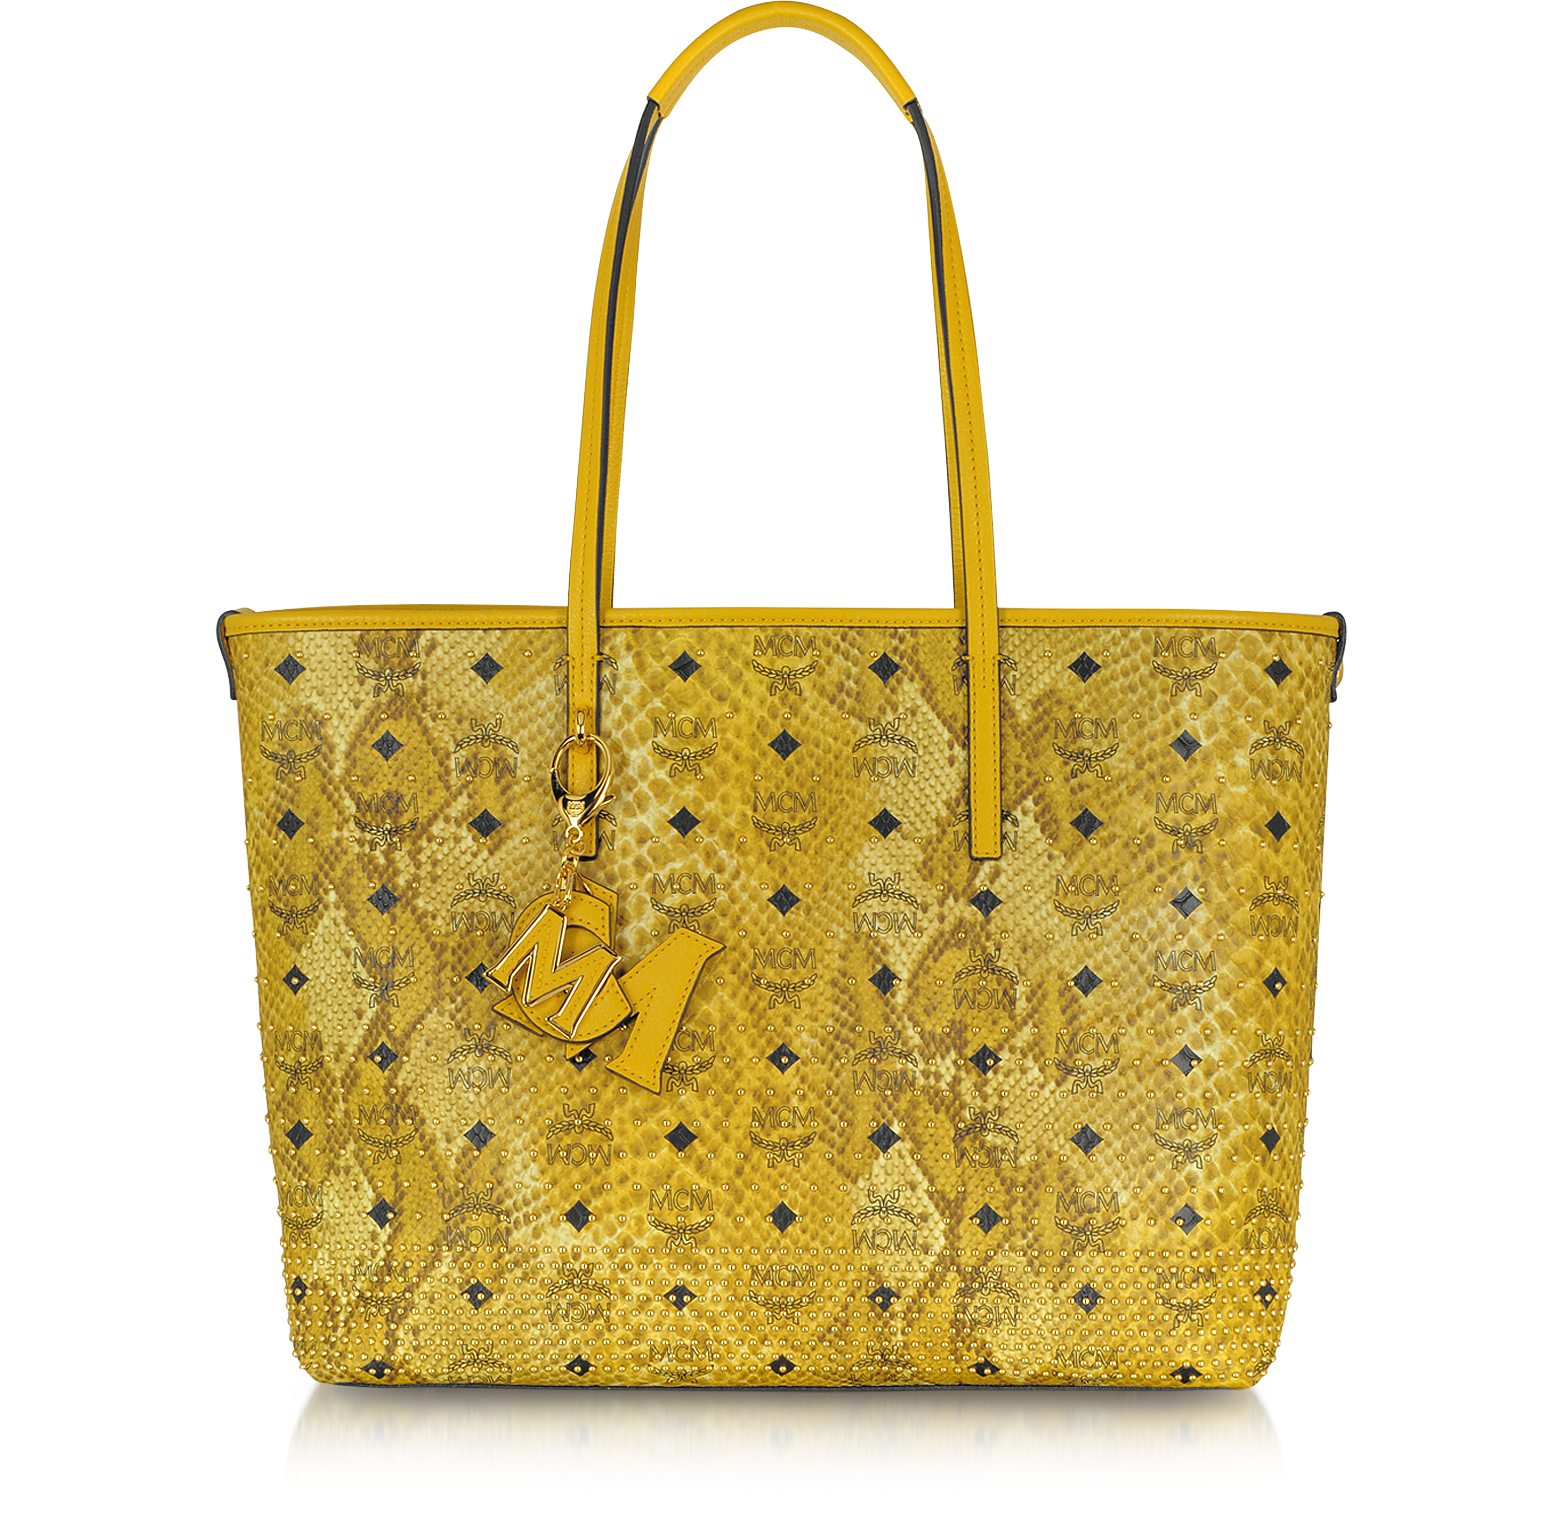 MCM Shopper Project - Animal Print Eco-Leather Tote at FORZIERI